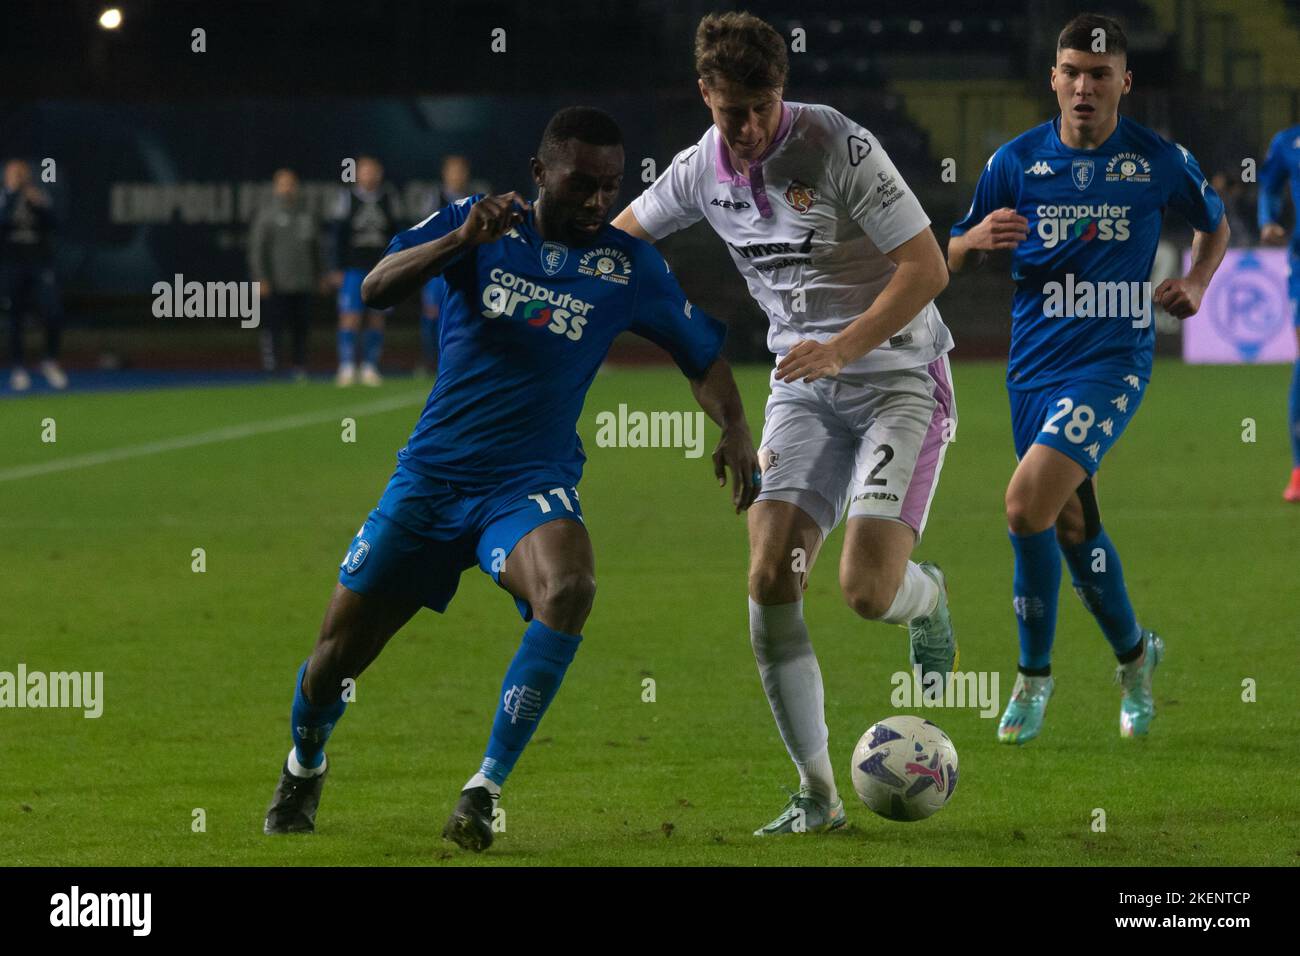 Empoli, Italy. 11th Nov, 2022. Akpa Akpro Jean Daniel Empoli hindered by Hendry Jack William during Empoli FC vs US Cremonese, italian soccer Serie A match in Empoli, Italy, November 11 2022 Credit: Independent Photo Agency/Alamy Live News Stock Photo